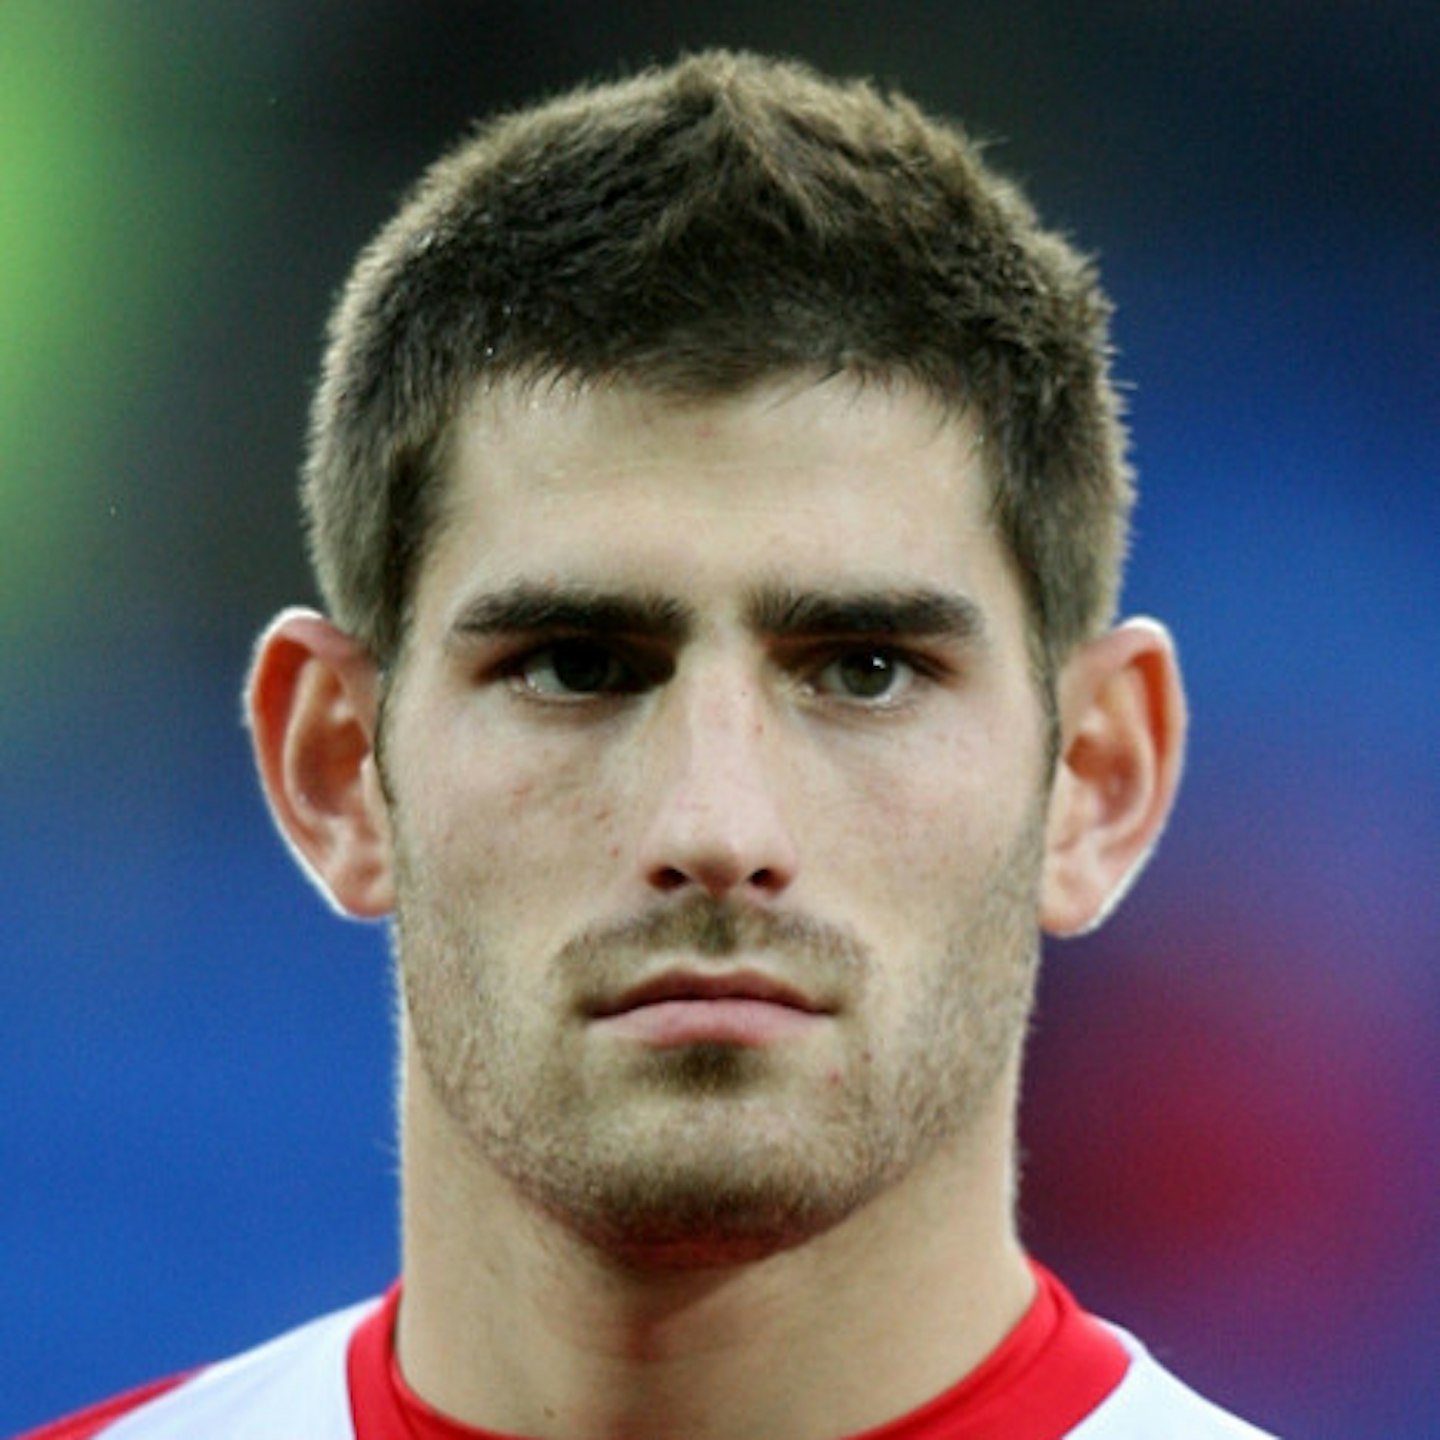 Footballer Ched Evans was convicted of rape